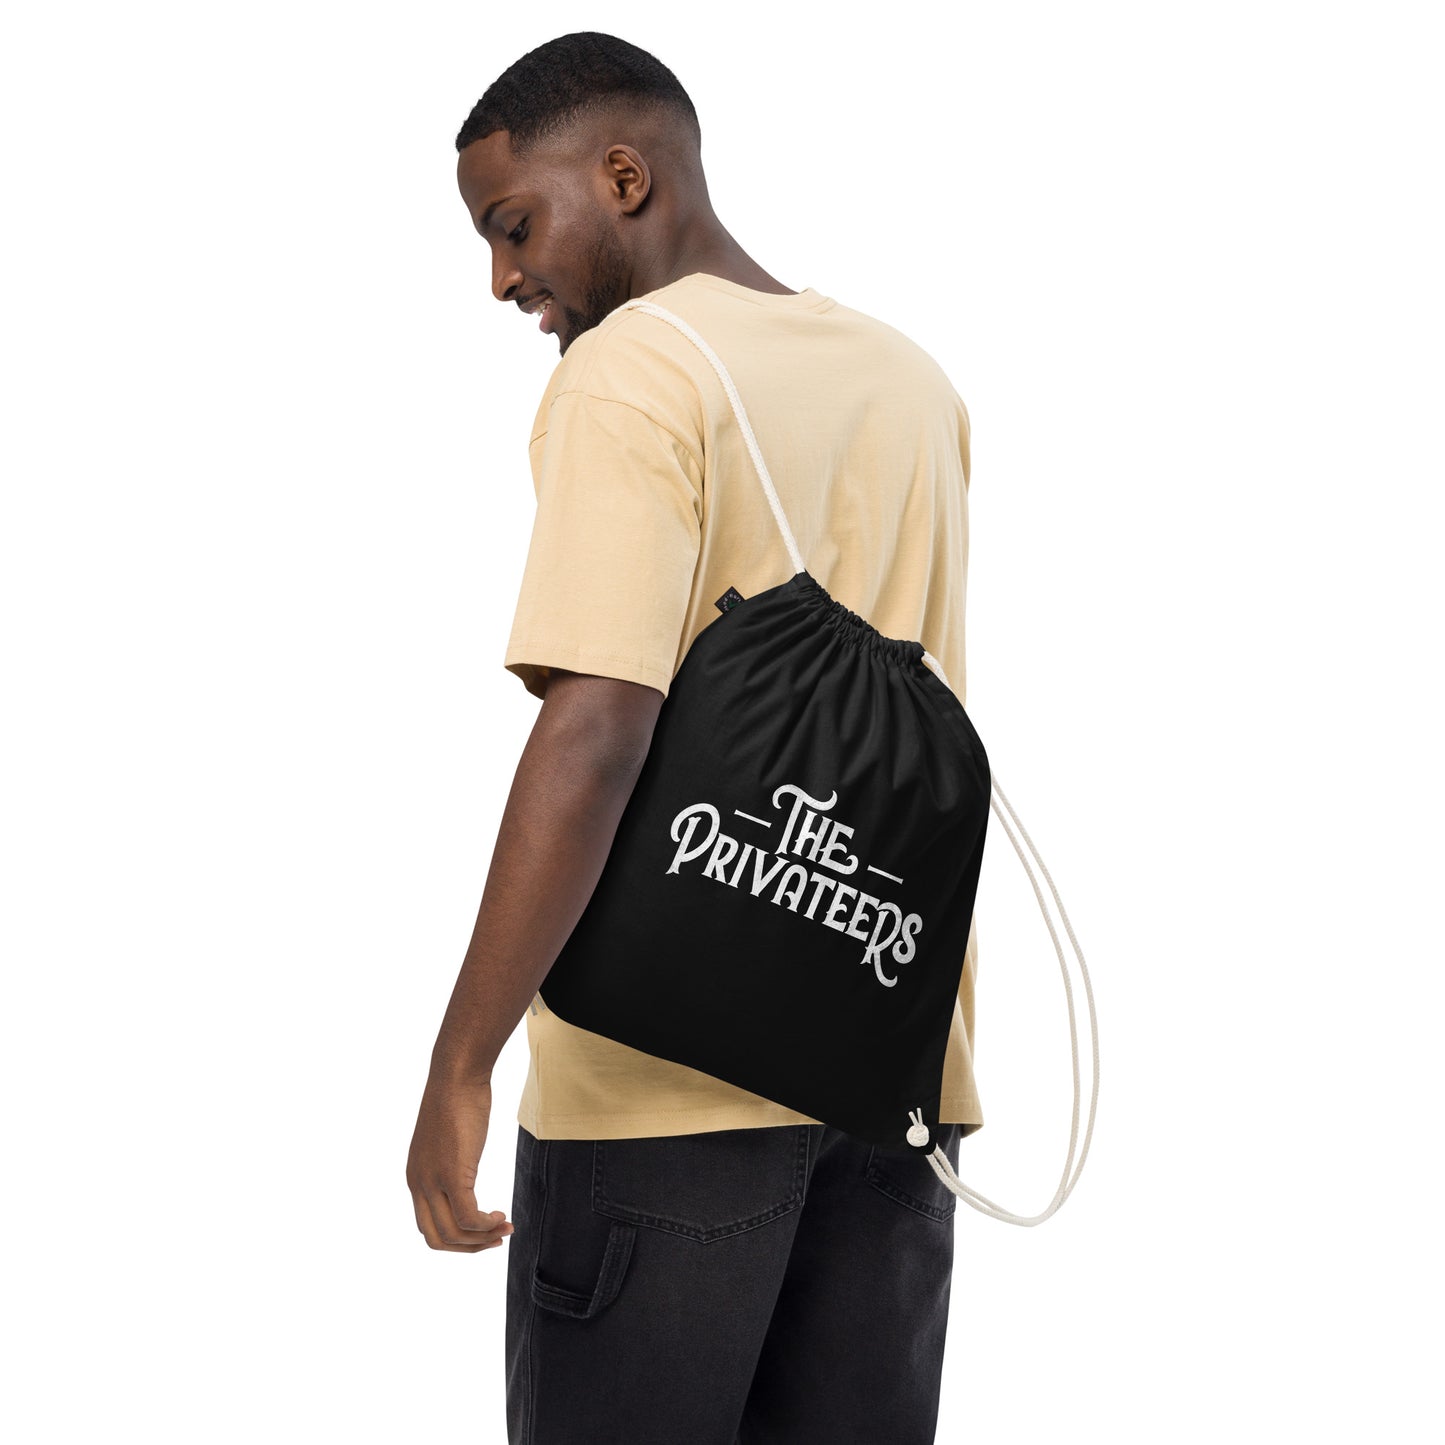 The Privateers - Organic cotton drawstring bag